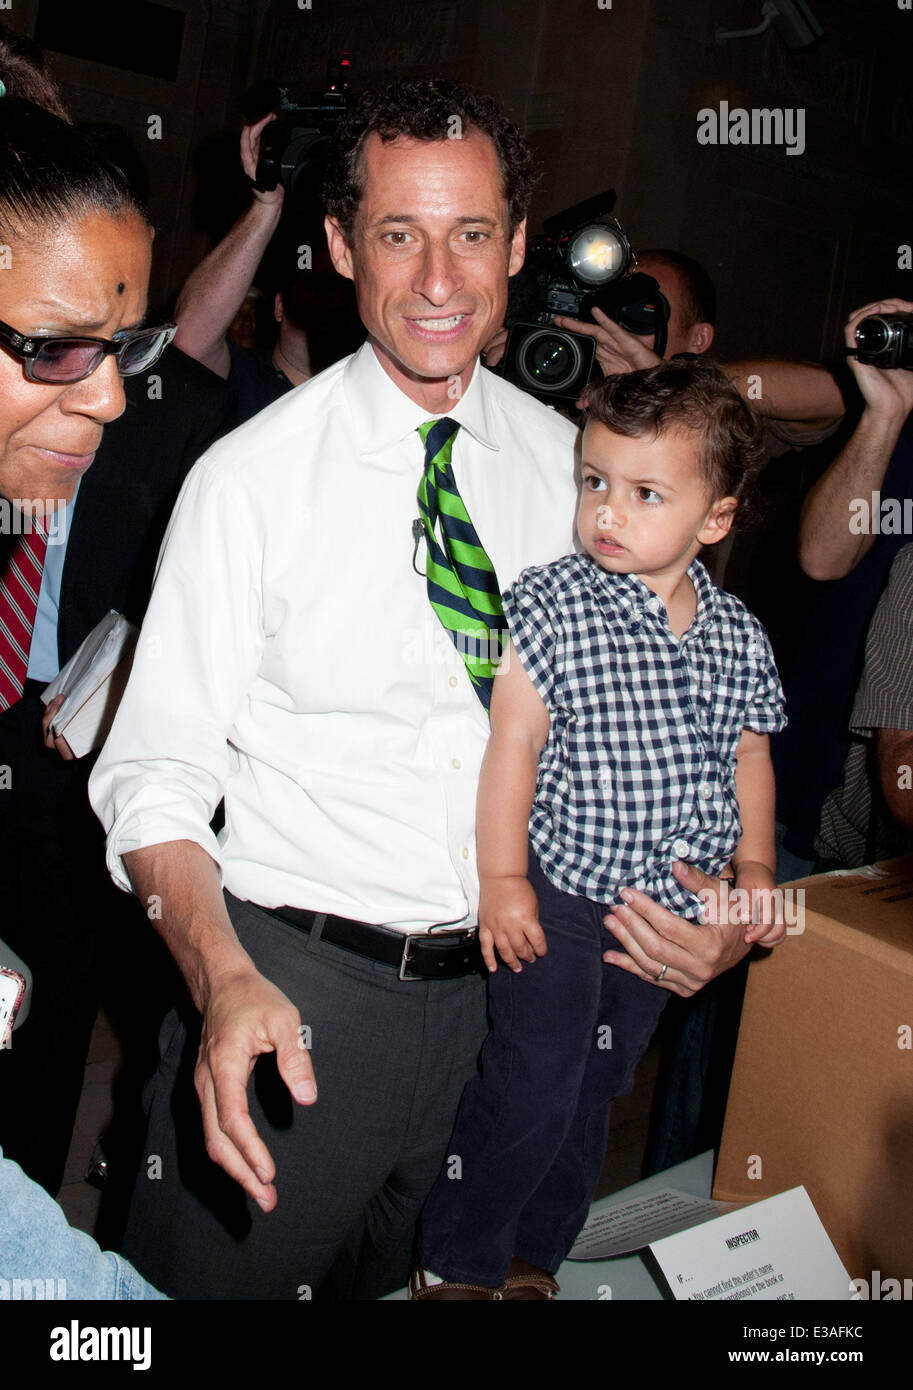 Anthony Weiner brings his son, Jordan Weiner to the voting booth in  Democratic Primary Featuring: Anthony Weiner,Jordan Weiner Where: New York,  NY, United States When: 10 Sep 2013 Stock Photo - Alamy